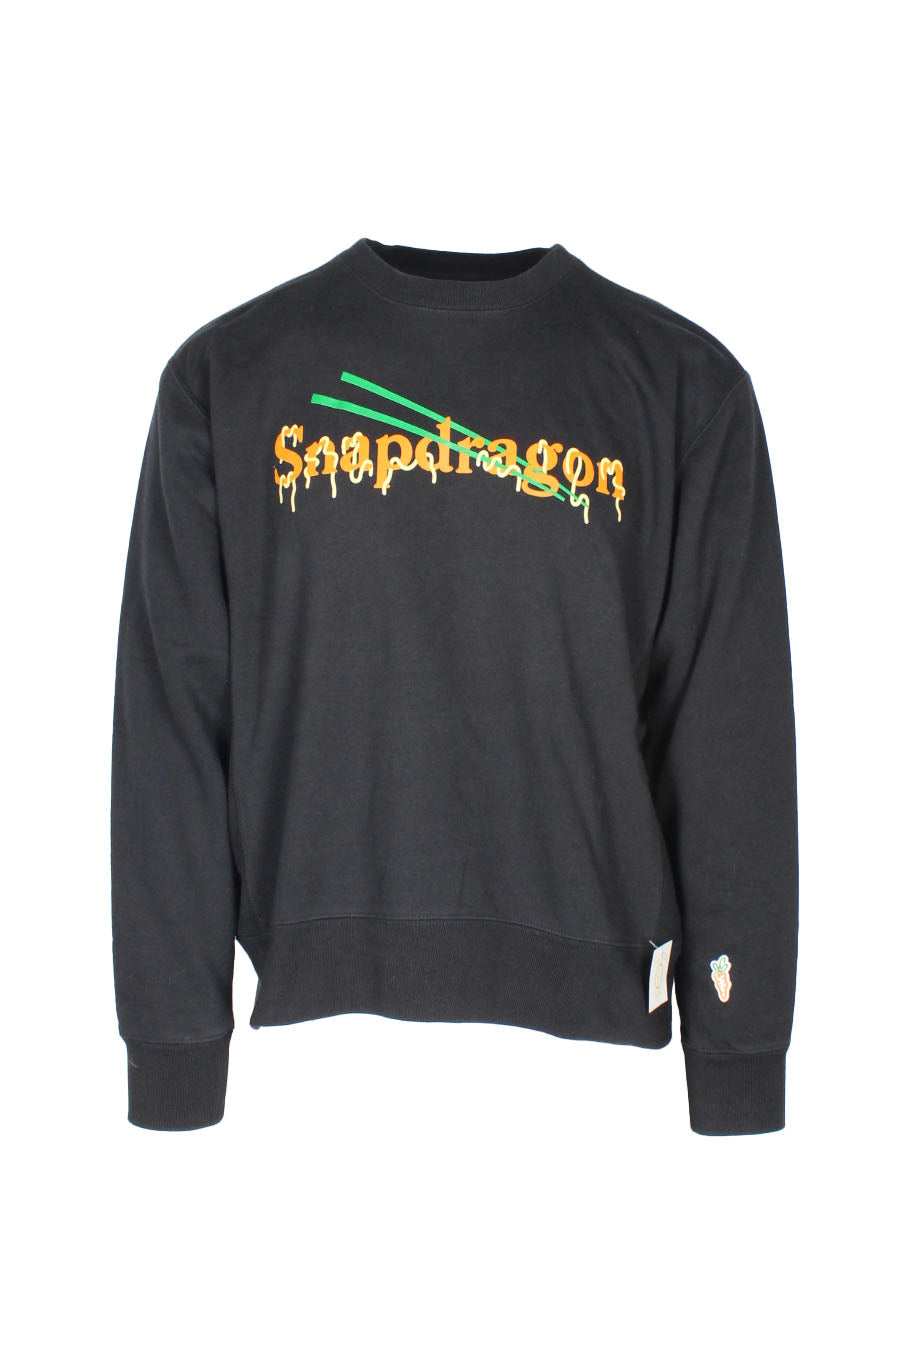 front view of carrots black pullover crew neck cotton sweatshirt. features ‘snapdragon’ graphic printed at chest and ribbed collar/cuffs/hem.